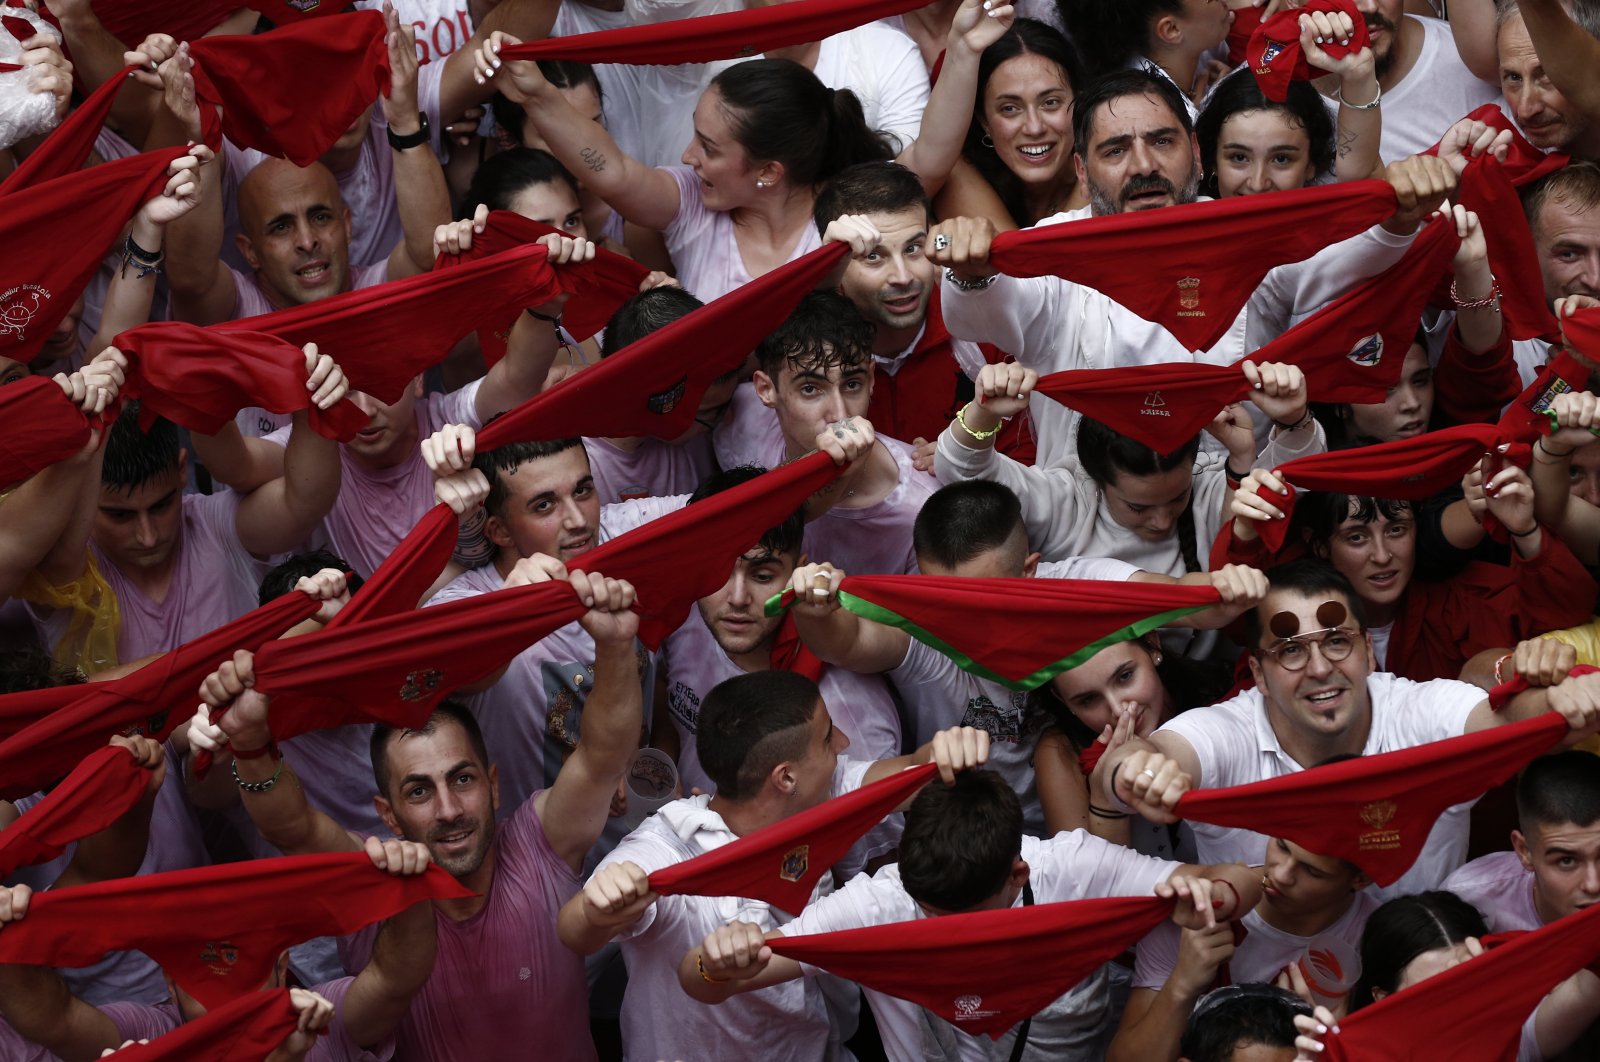 Revelers hold up the traditional red scarves at the Consistorial Square during the &quot;chupinazo&quot; that marks the beginning of the San Fermin Festival in Pamplona, Spain, July 6, 2022. (EPA Photo)